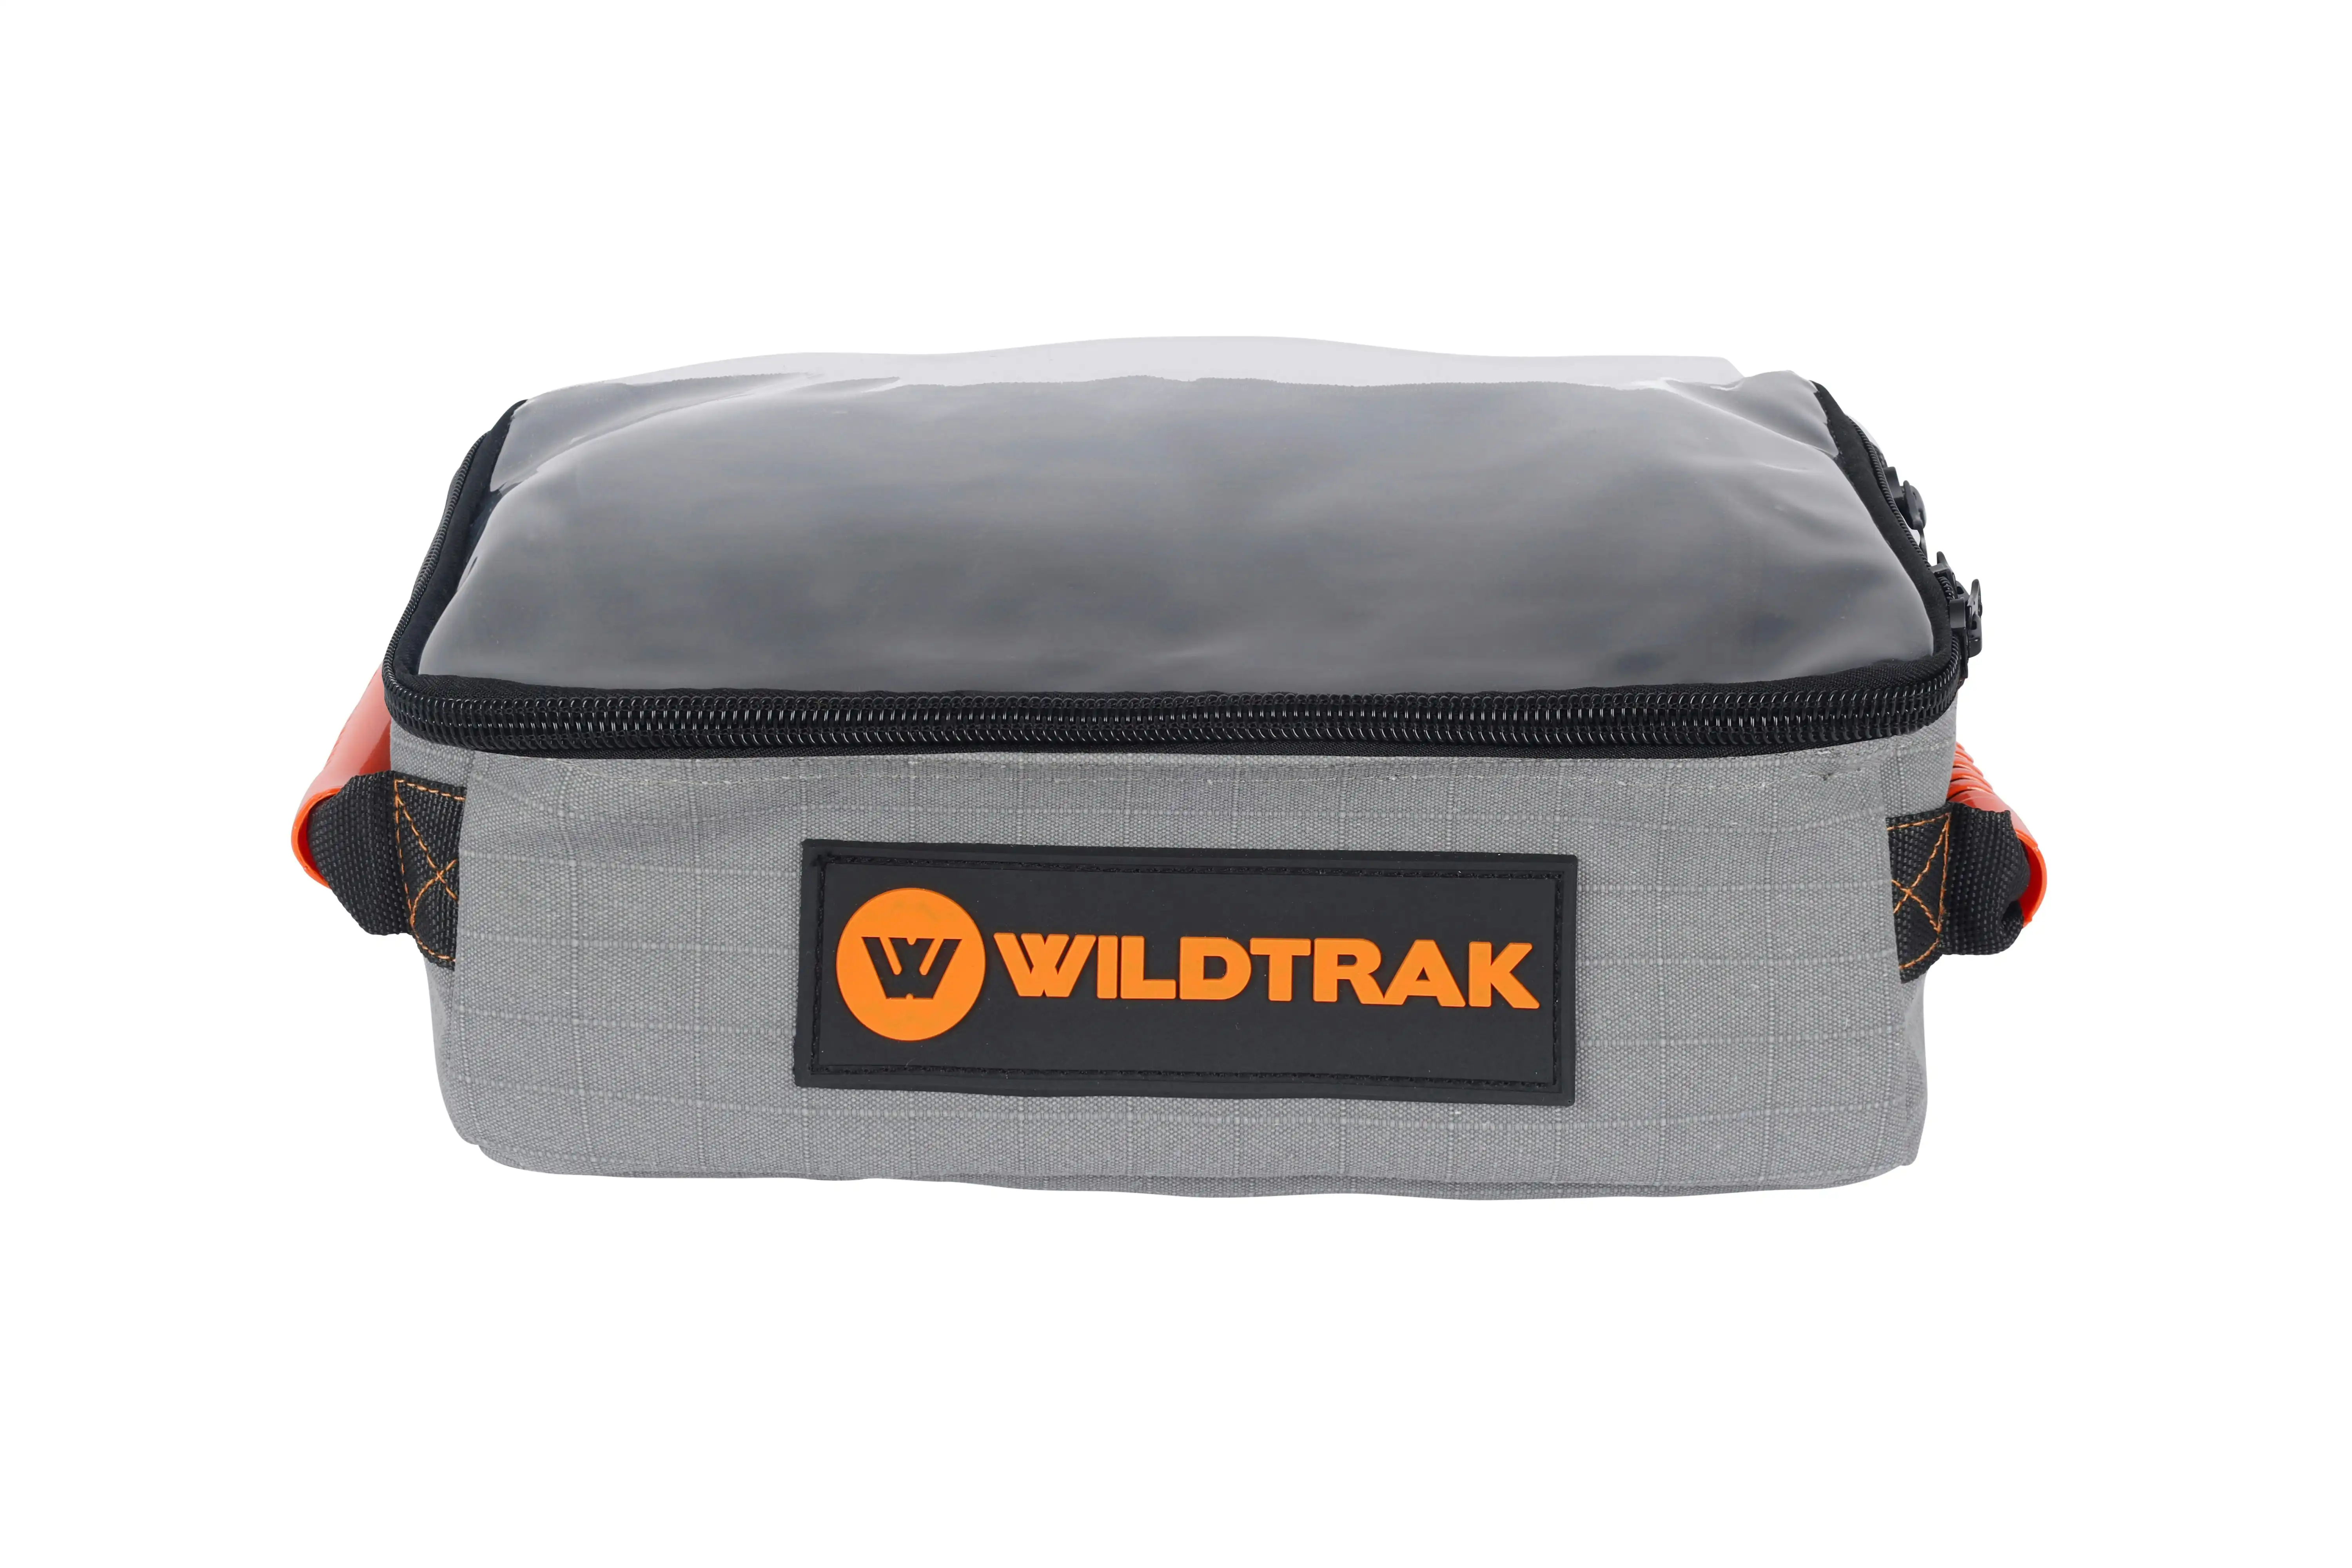 Wildtrak™ Small Clear Top Storage Bag for Camping and 4WD Off-Roading - Heavy-Duty 400GSM Ripstop Canvas